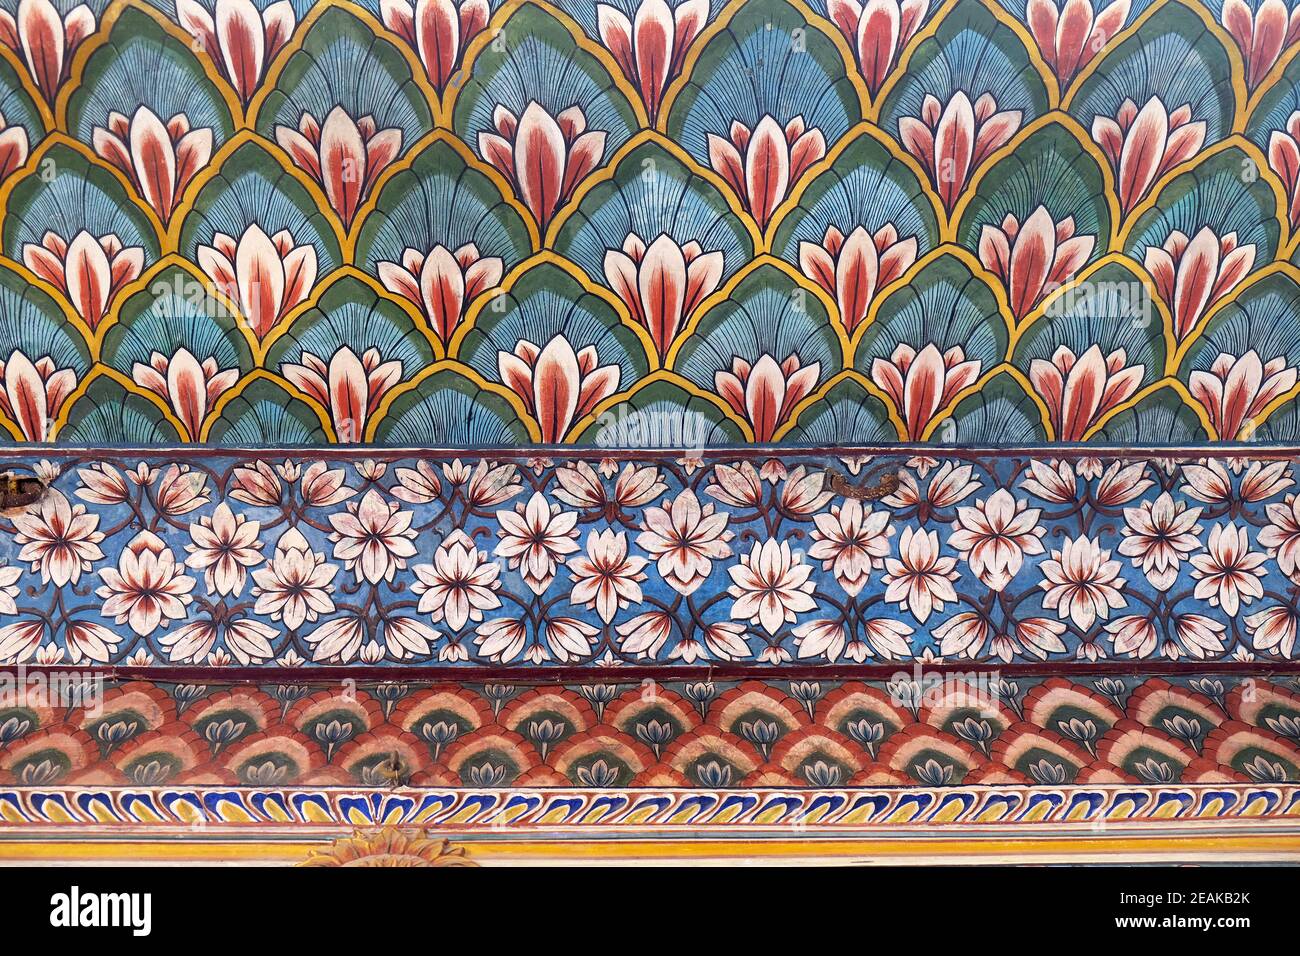 Wall paintings in the Chandra Mahal, Jaipur City Palace in Jaipur,  Rajasthan, India Stock Photo - Alamy